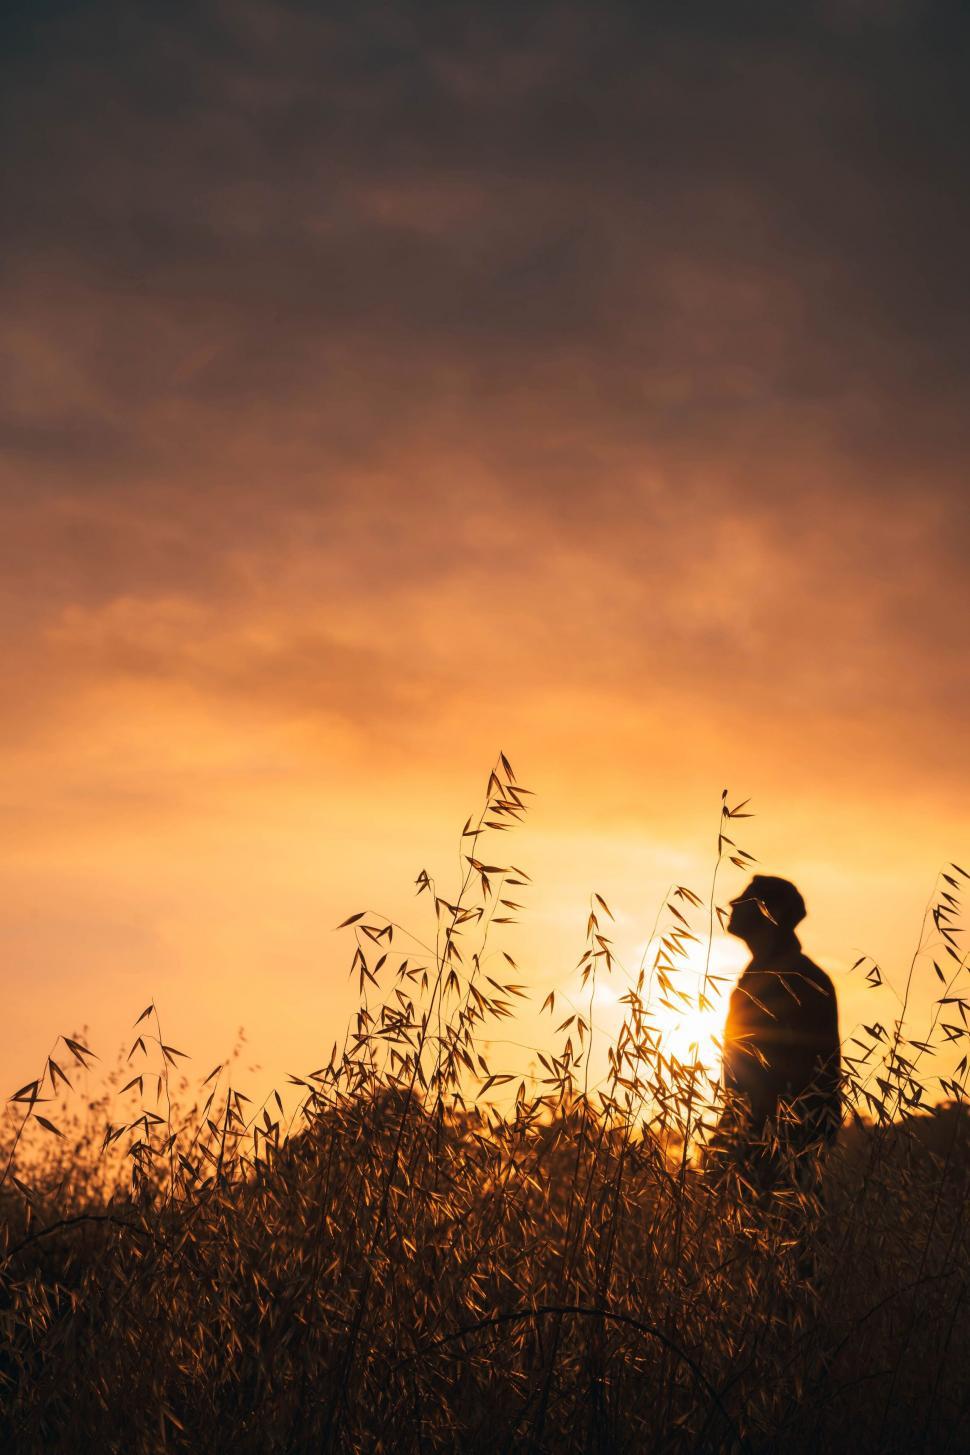 Free Image of Silhouette of a person at sunset in tall grass 